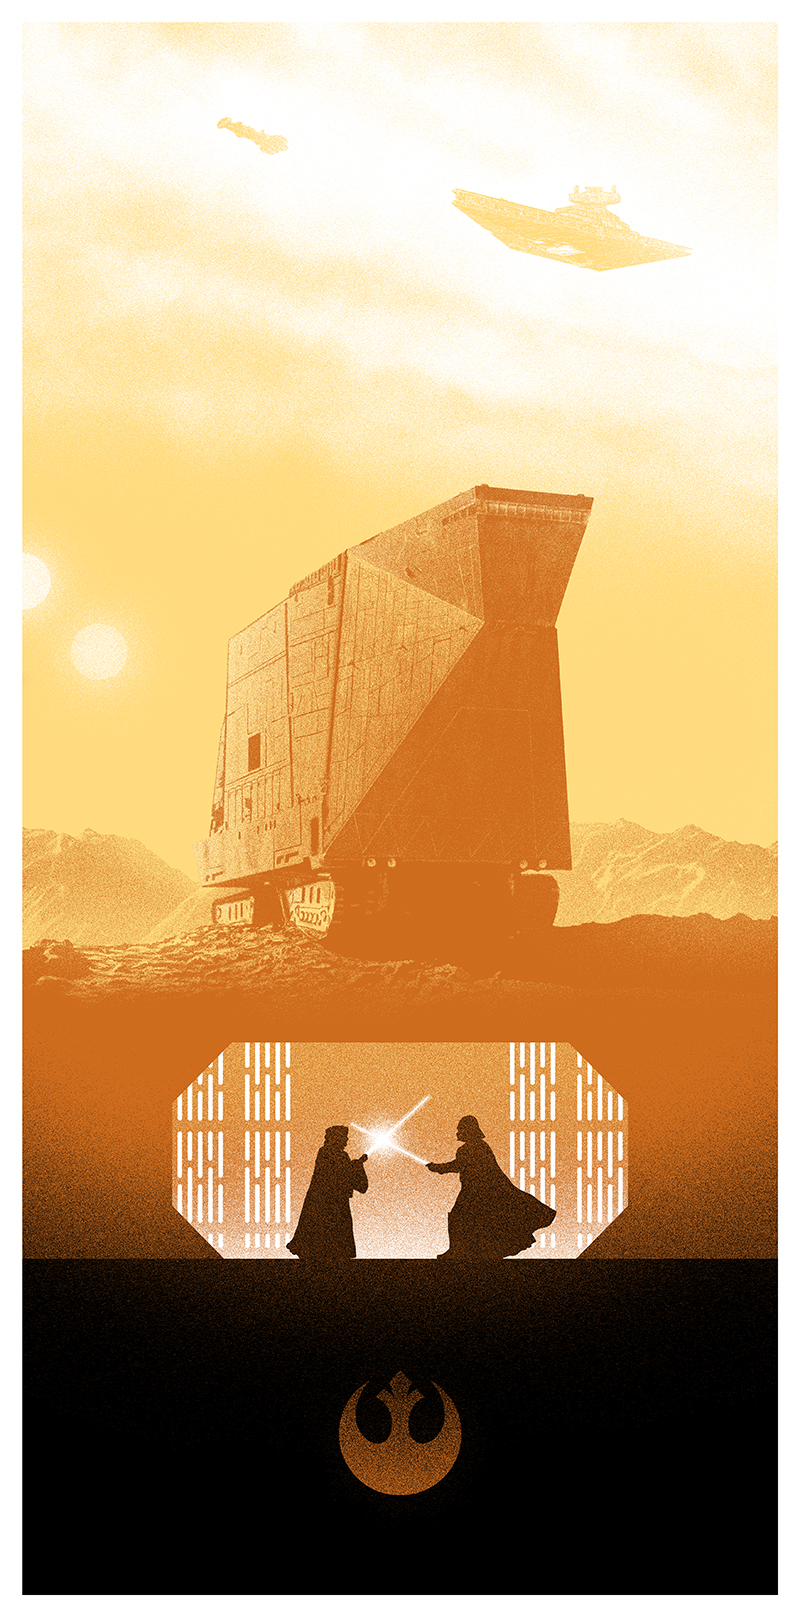 A new hope by Marko Manev